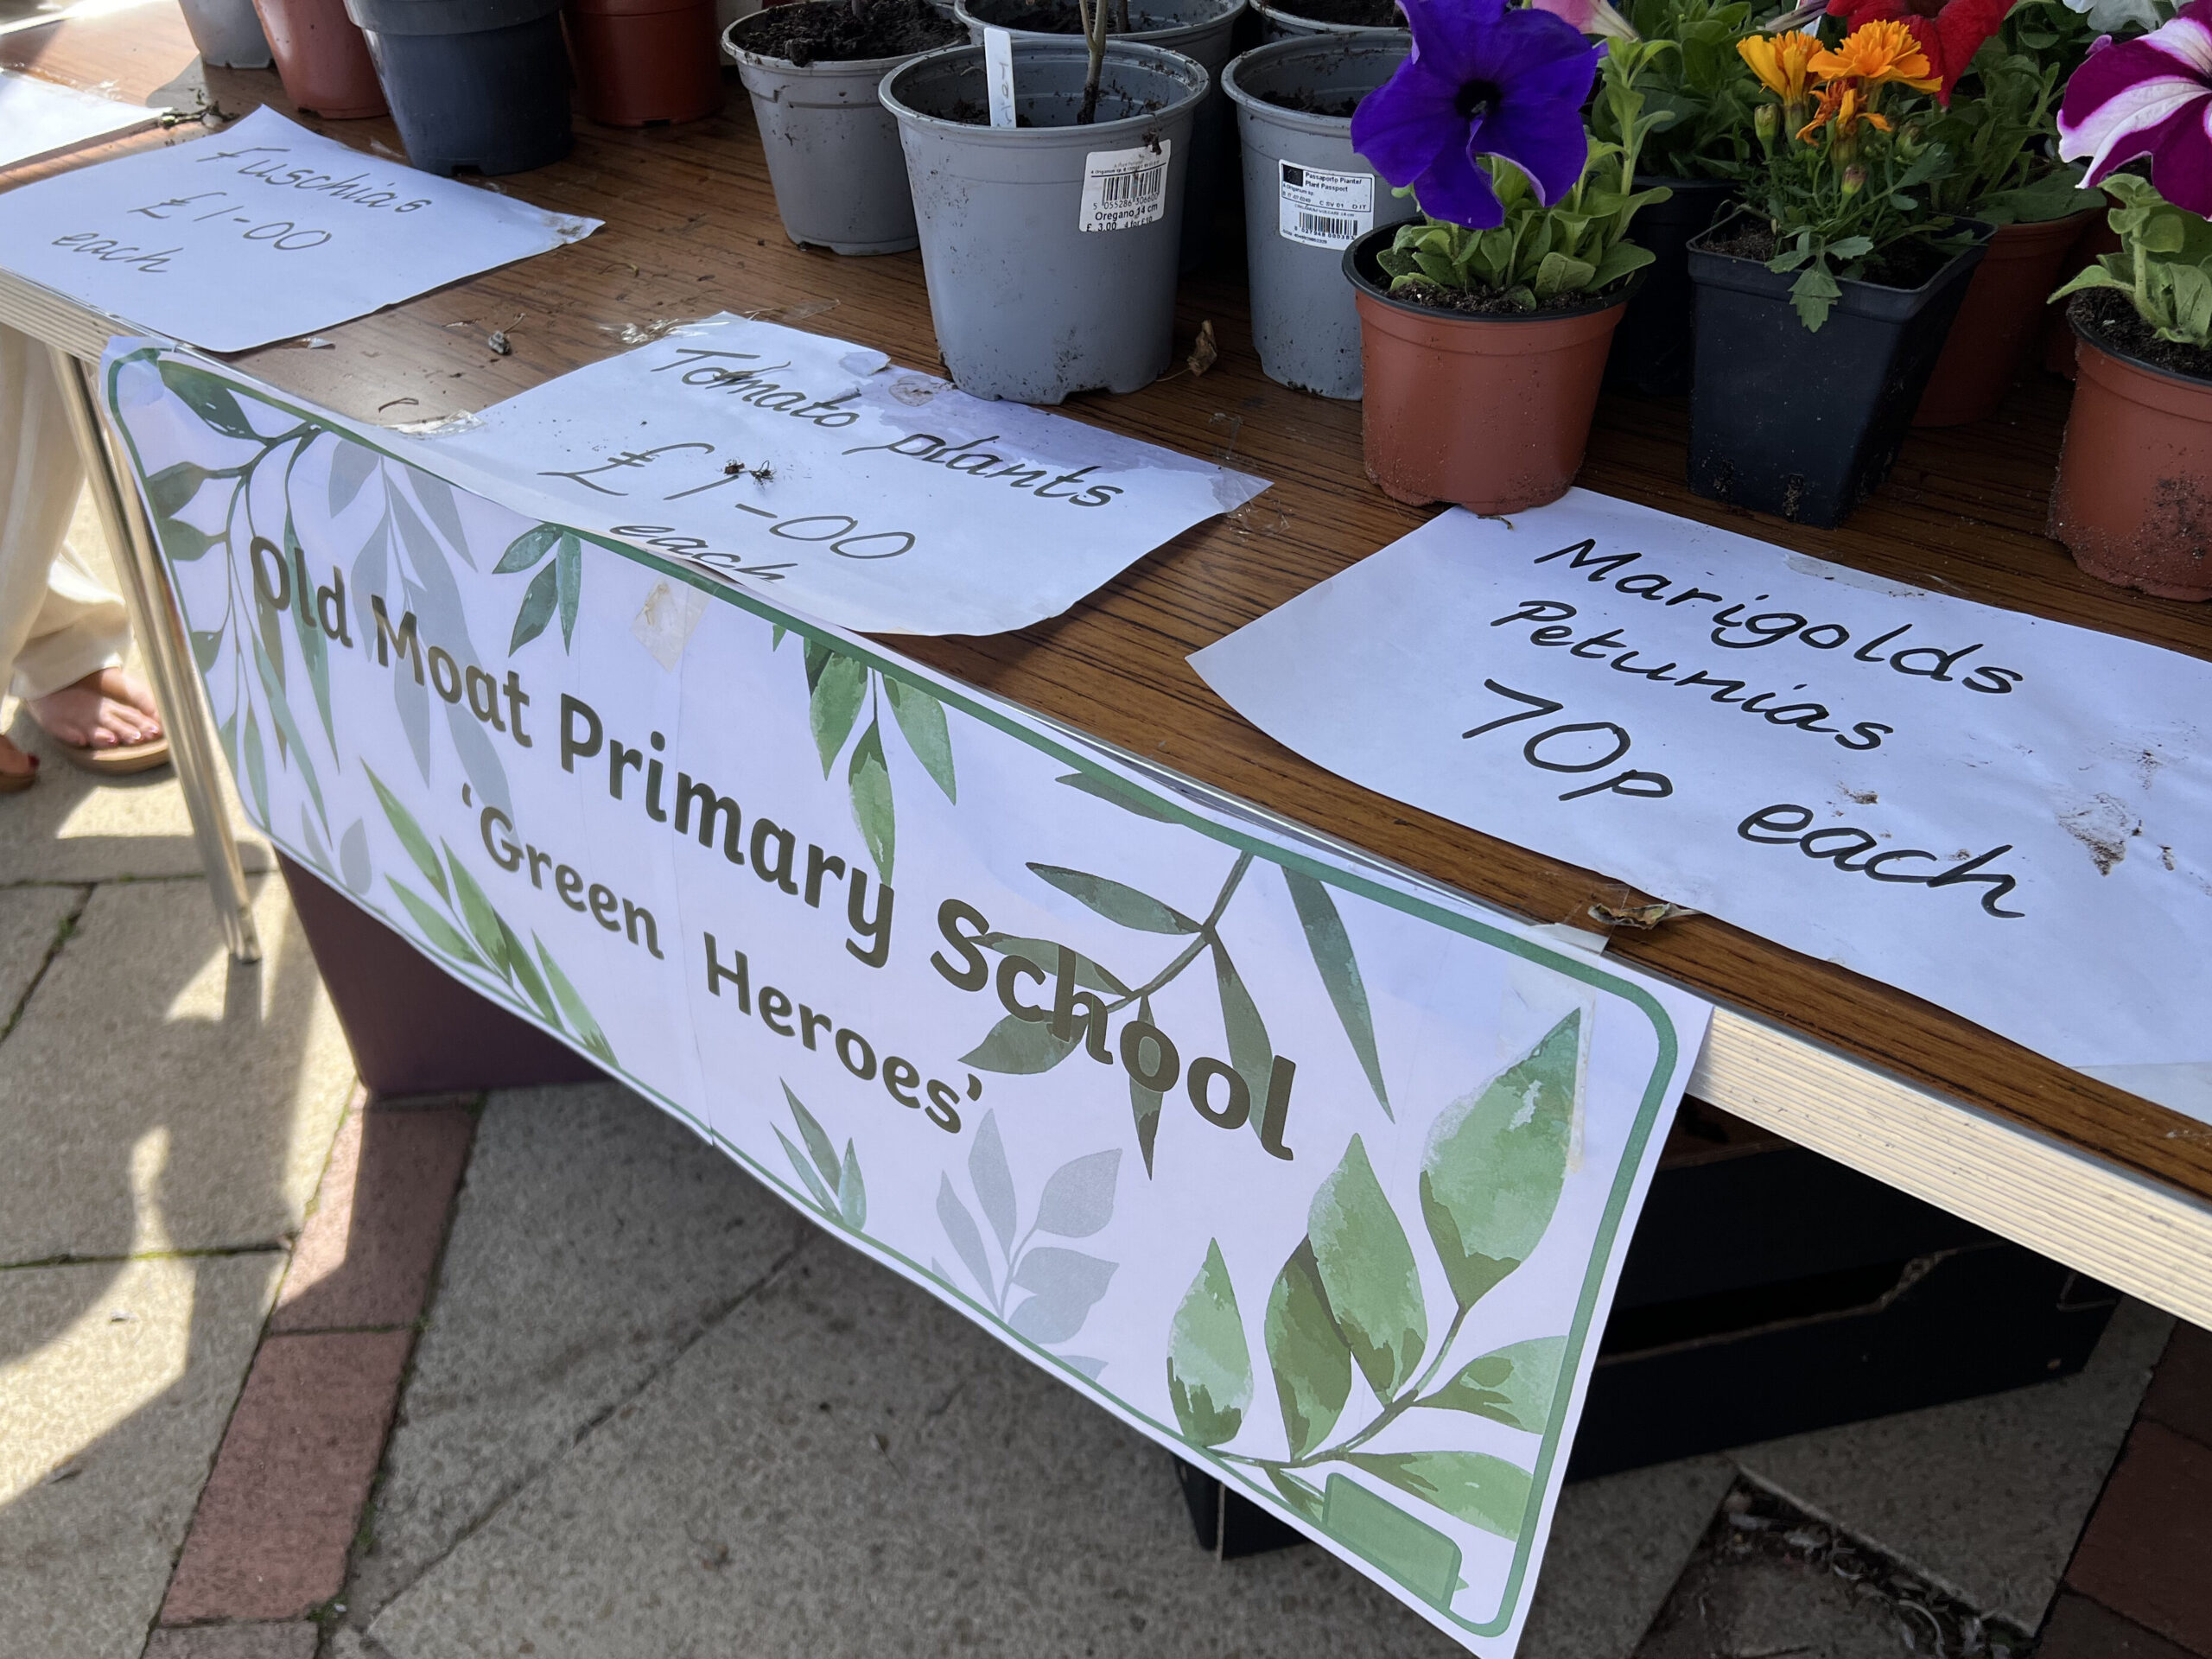 Multiple flowers being sold by local school for £1 and 70p each. Sign reads "Old Moat Primary School 'Green Heroes'"